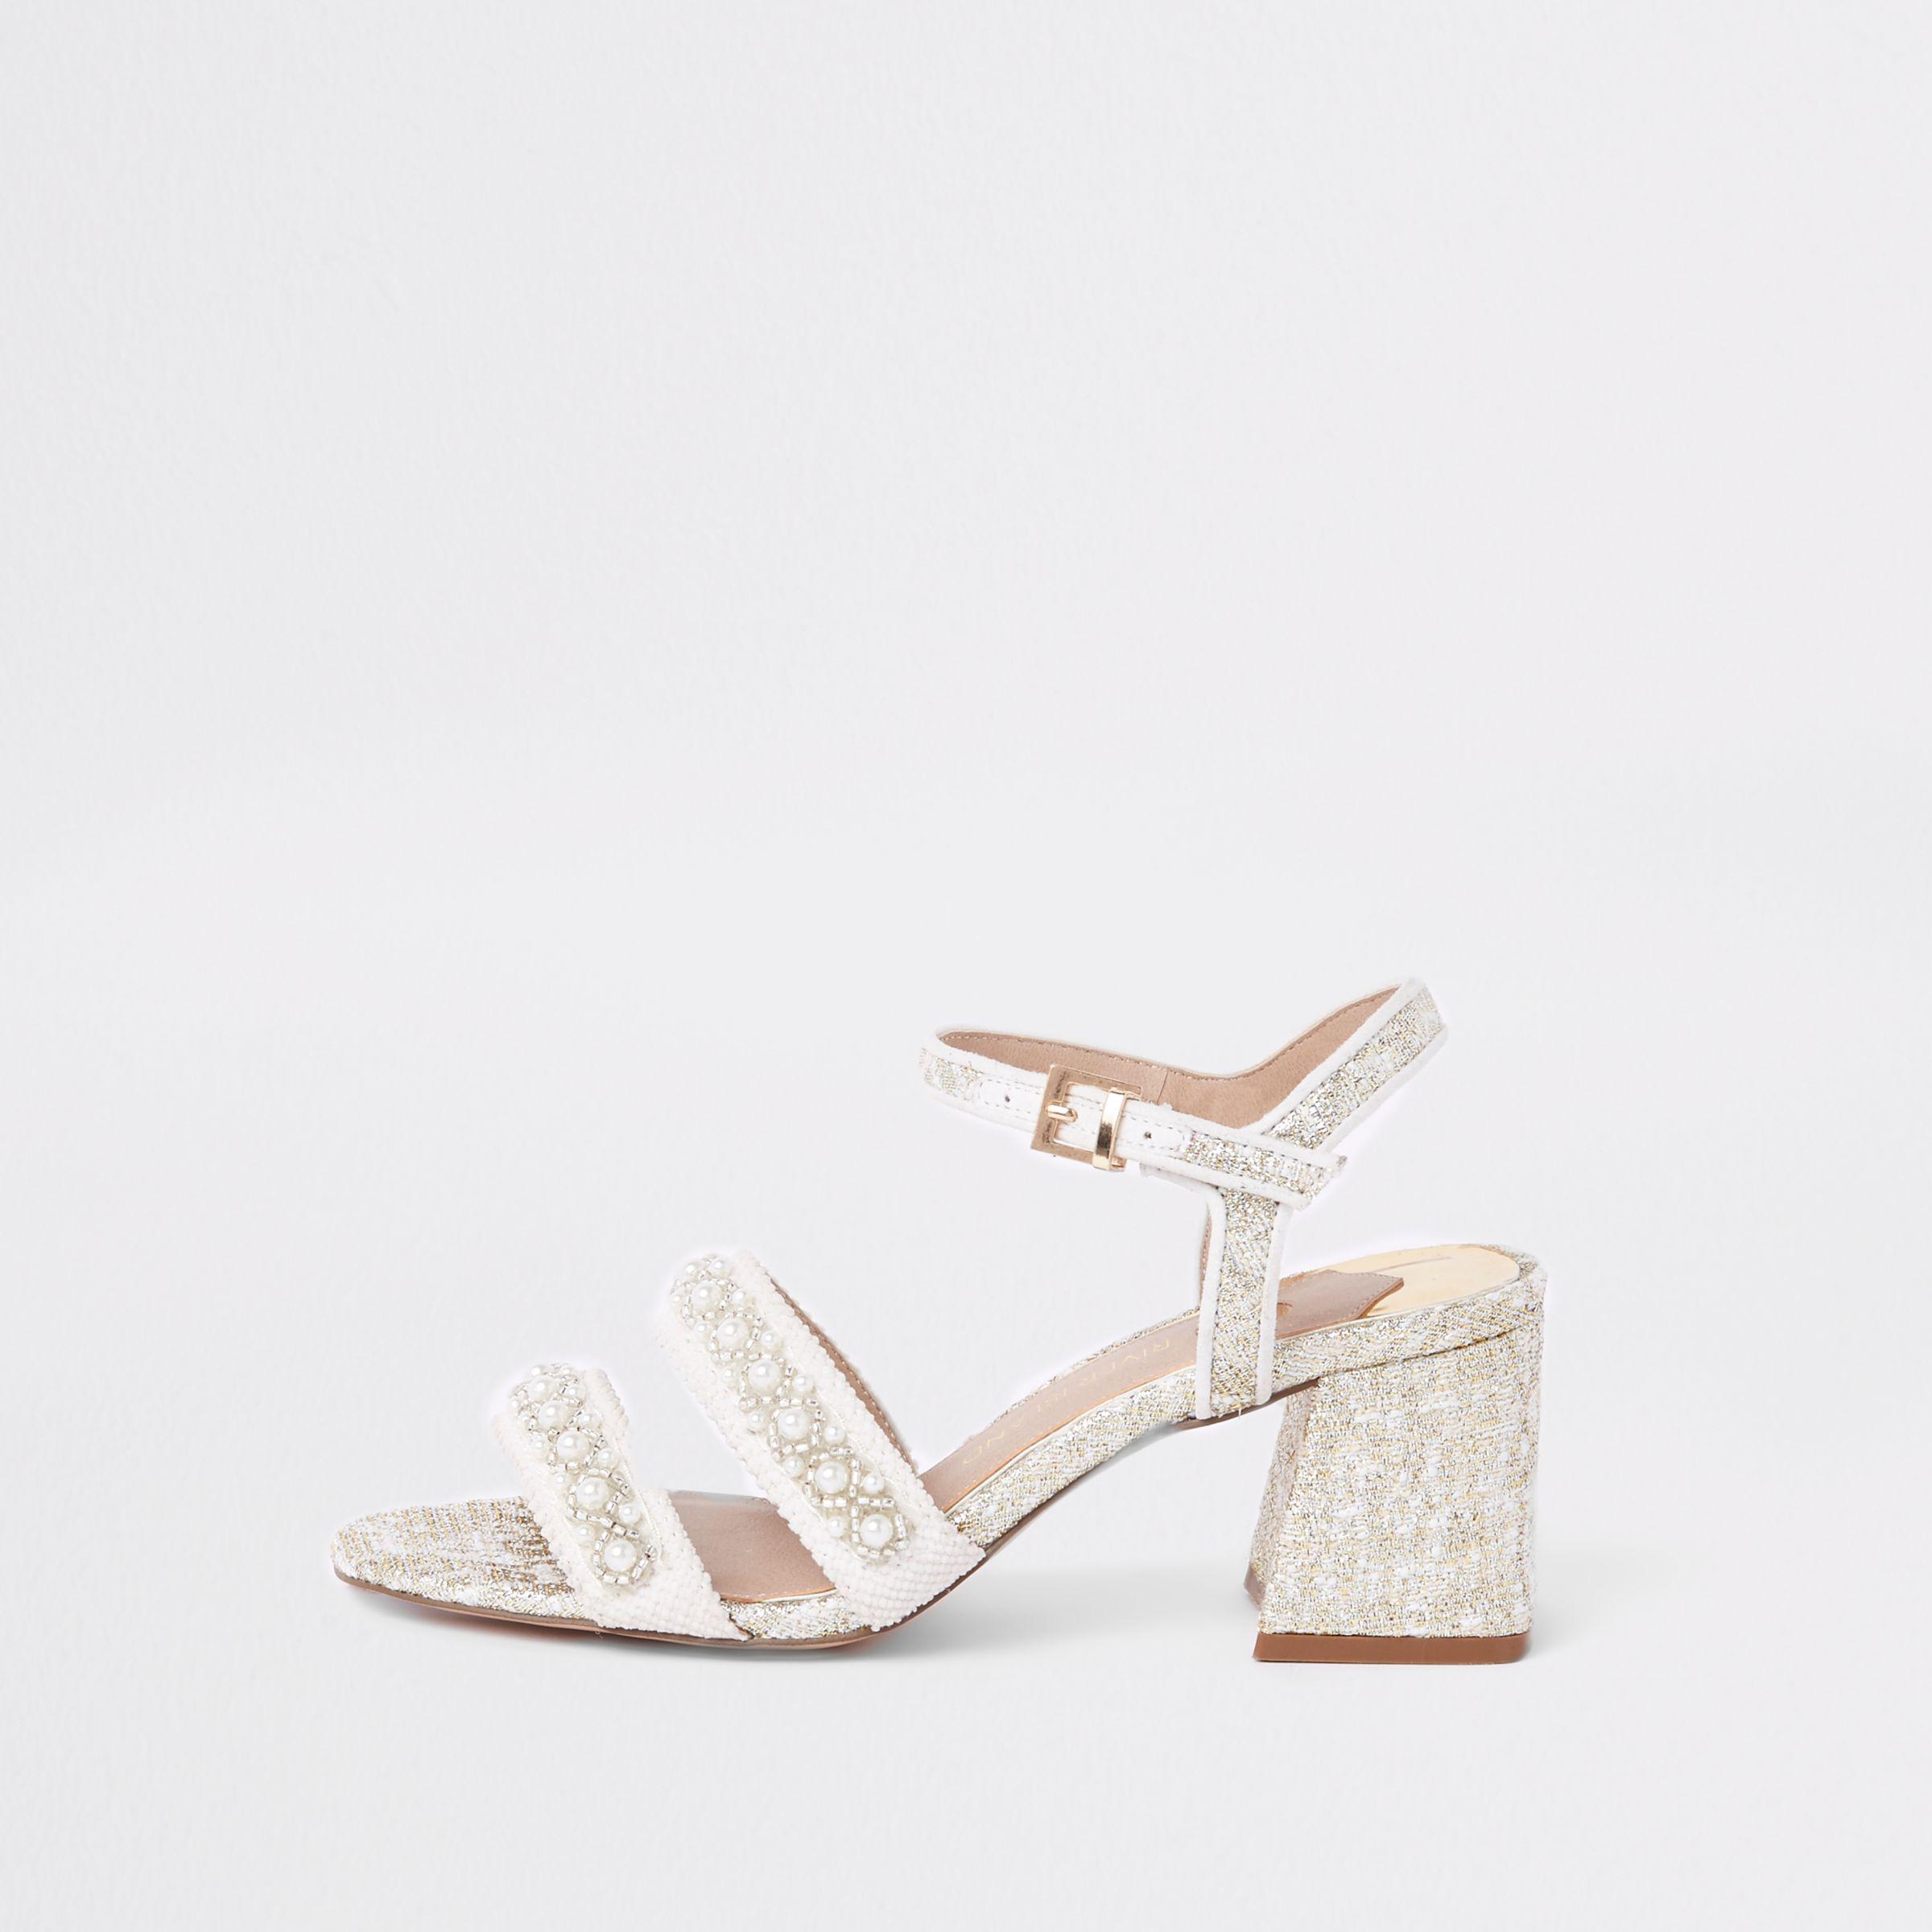 River Island Textile Pearl Block Heel Sandals in White | Lyst